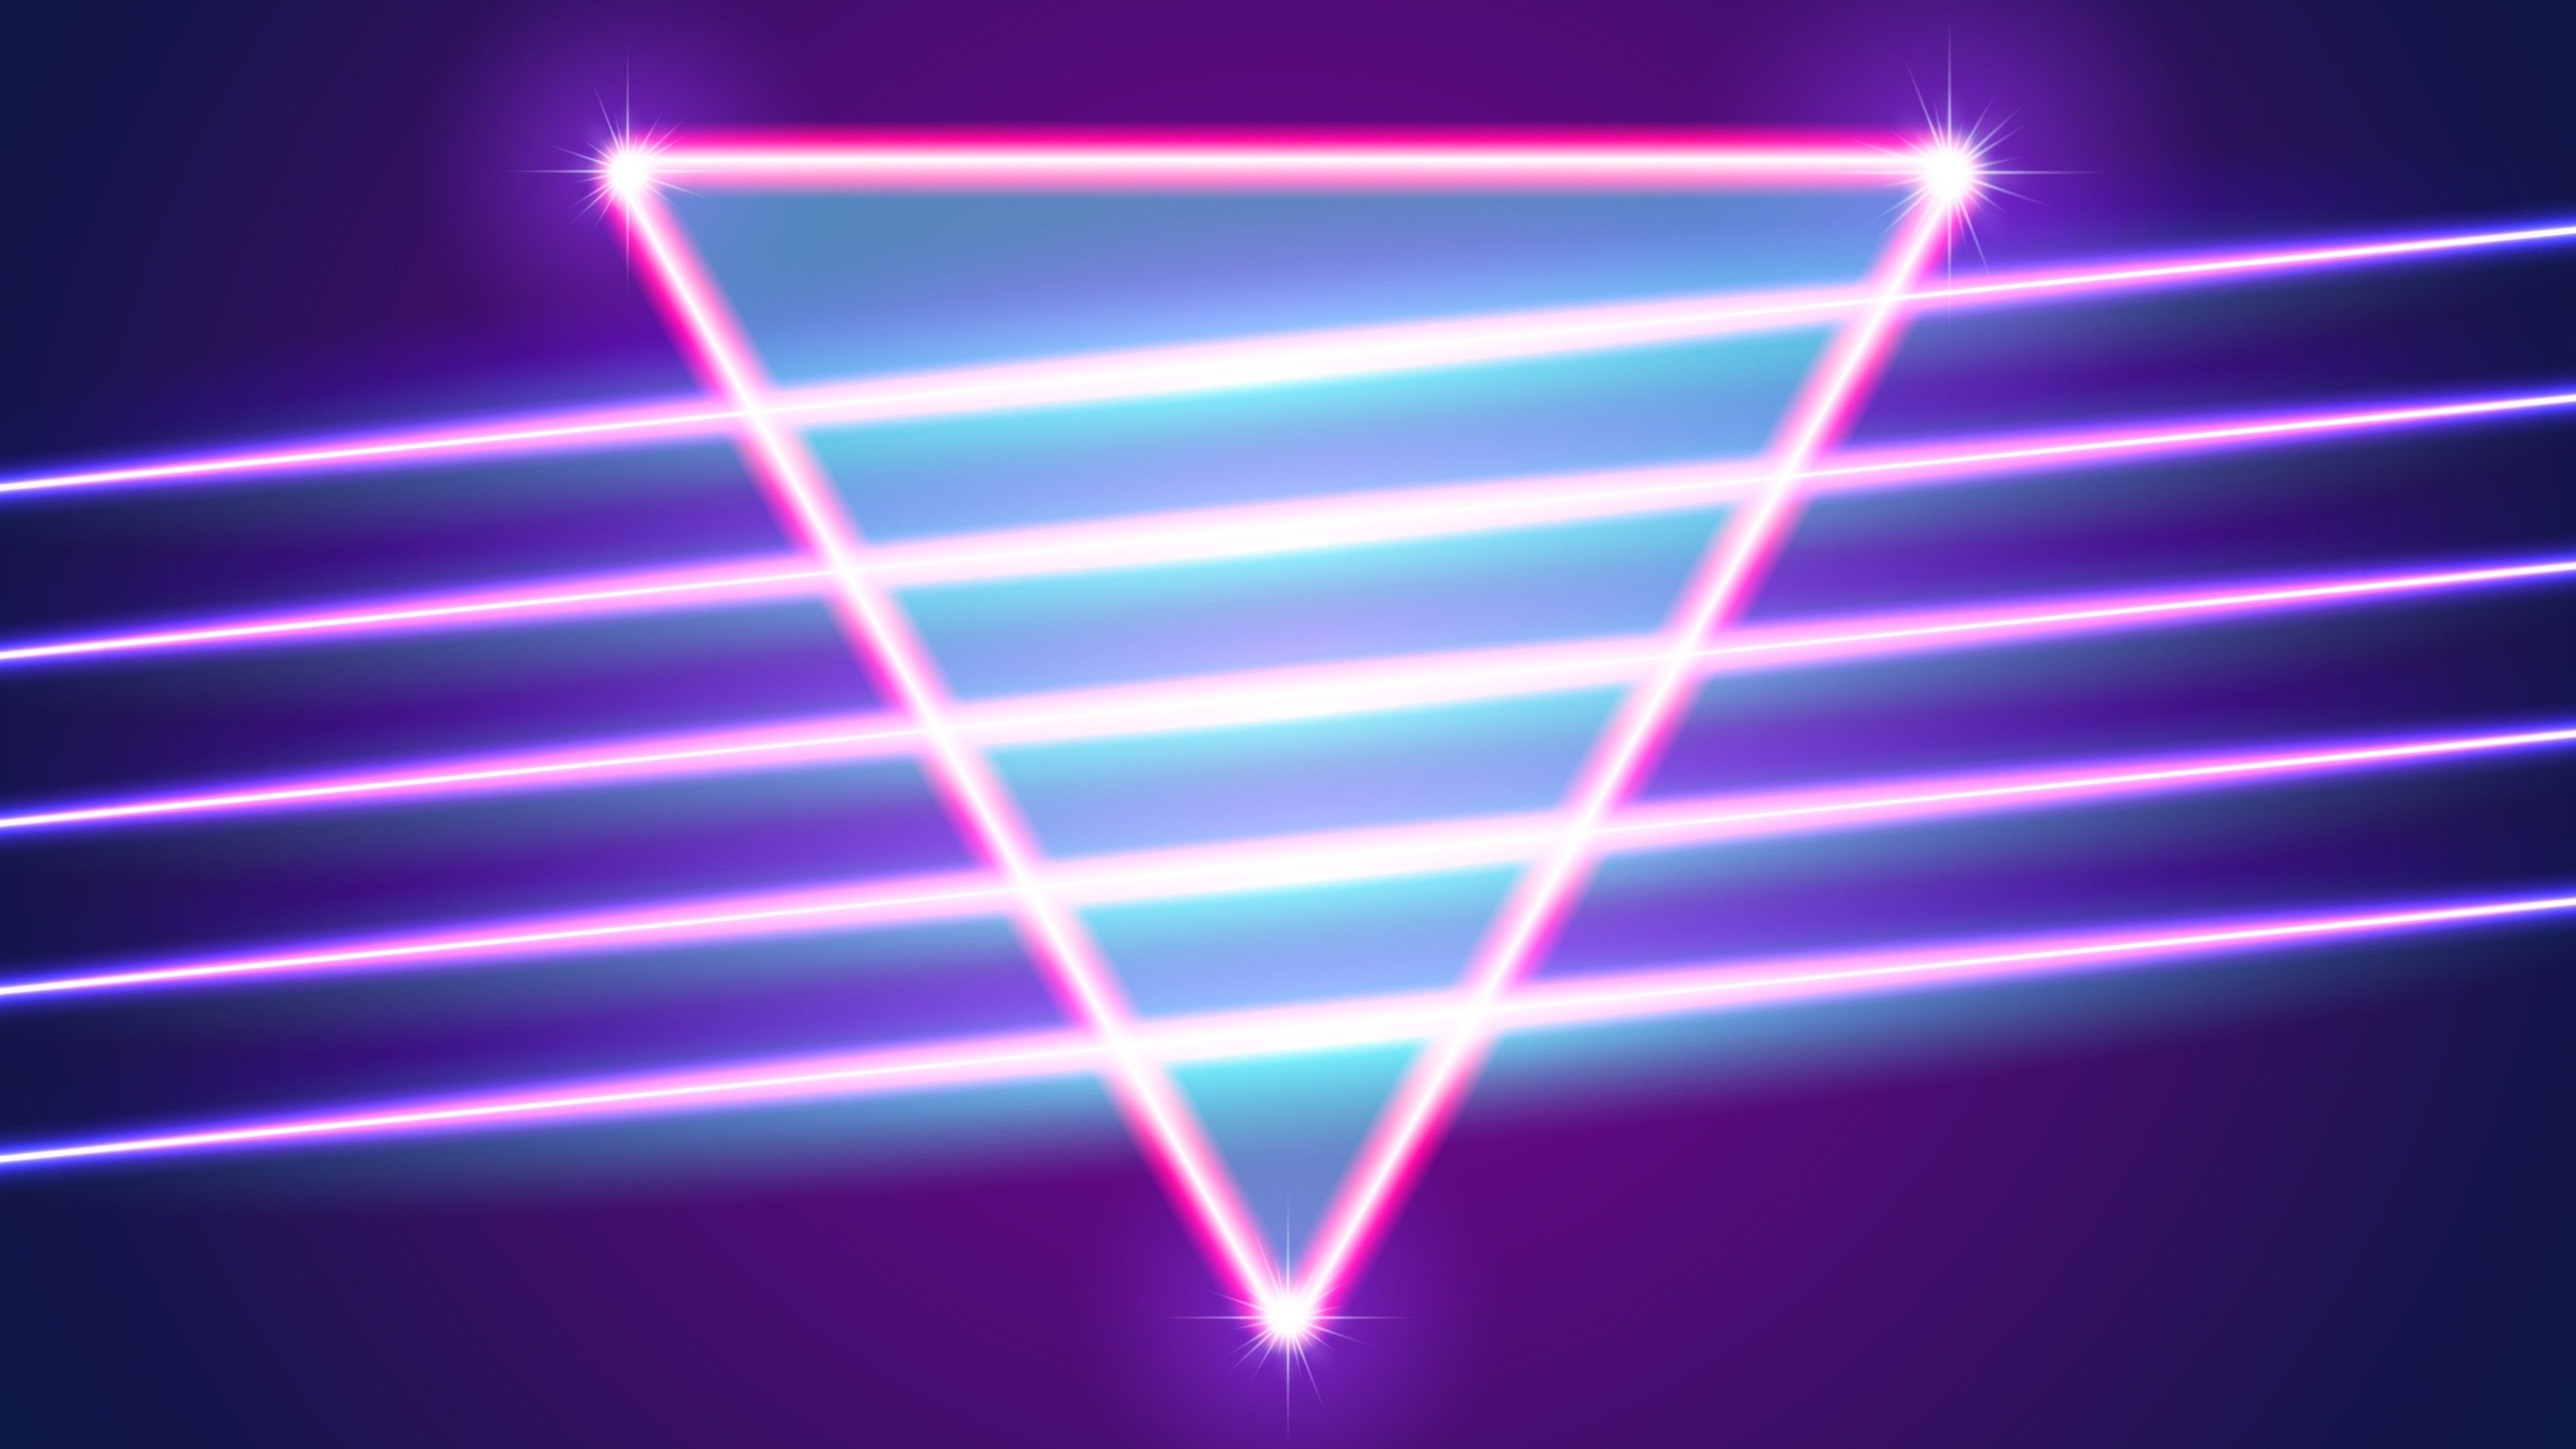 Abstract neon triangles, Geometric patterns, Neon lights, Creative visual compositions, 3840x2160 4K Desktop